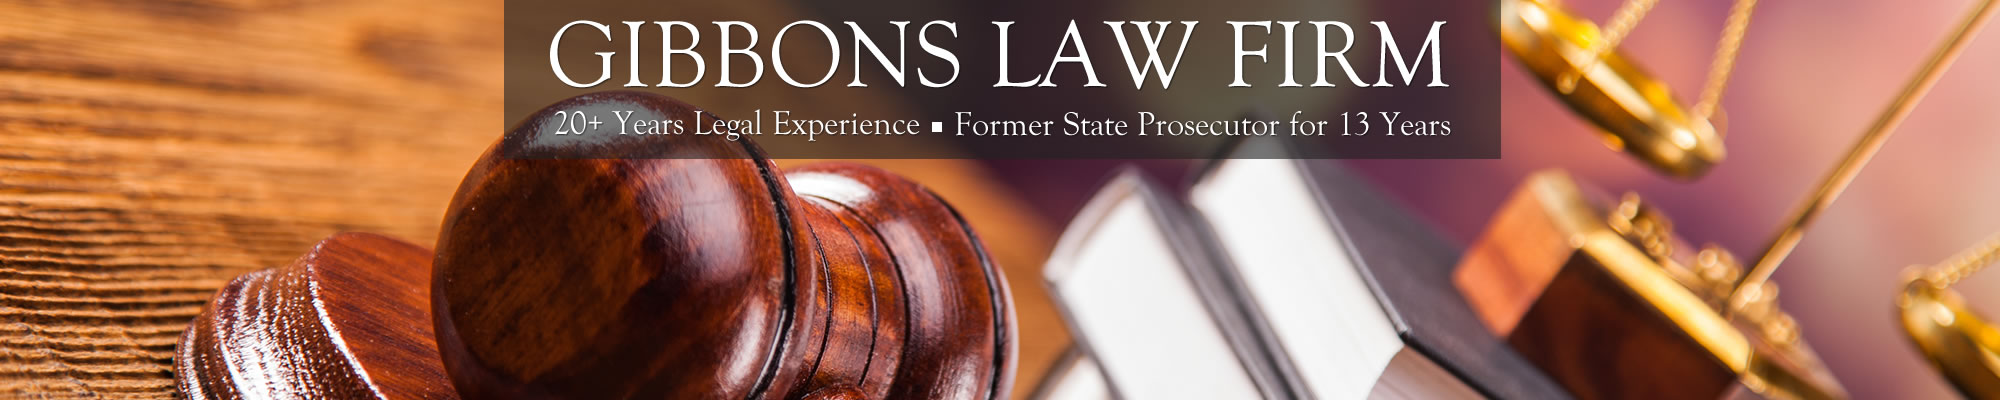 Gibbons Law Firm Lake of the Ozarks